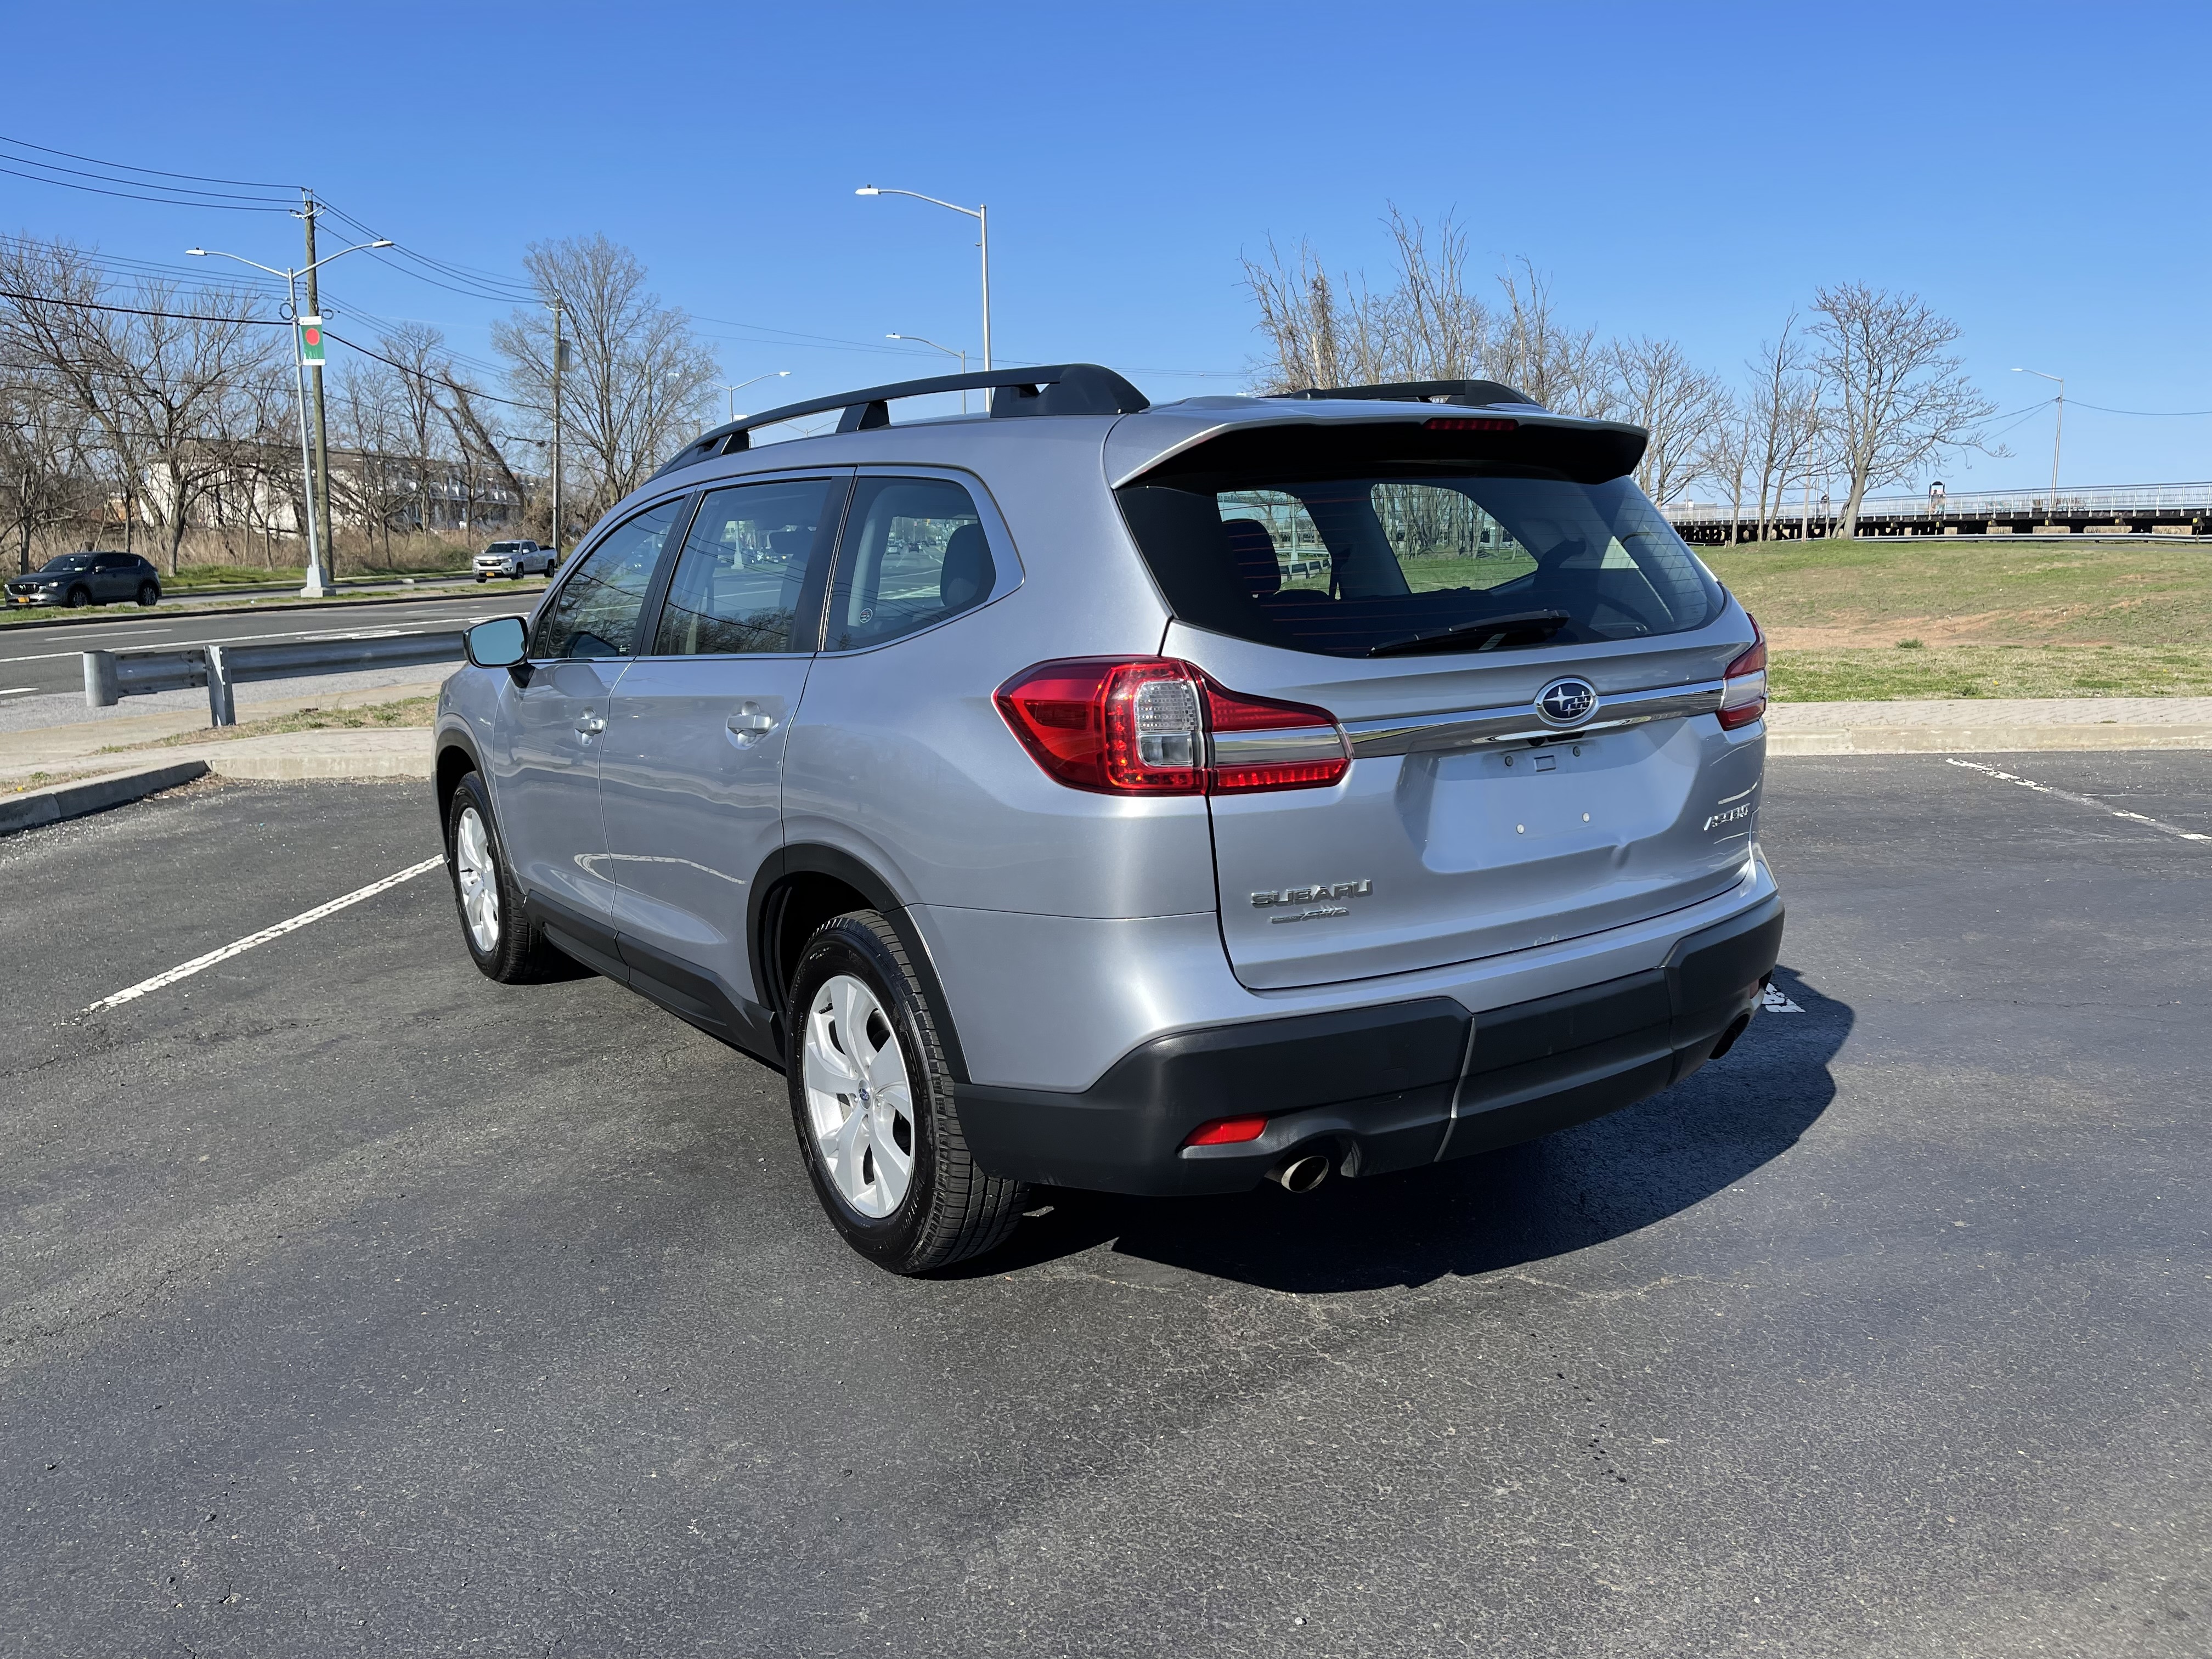 Used - Subaru Ascent AWD SUV for sale in Staten Island NY